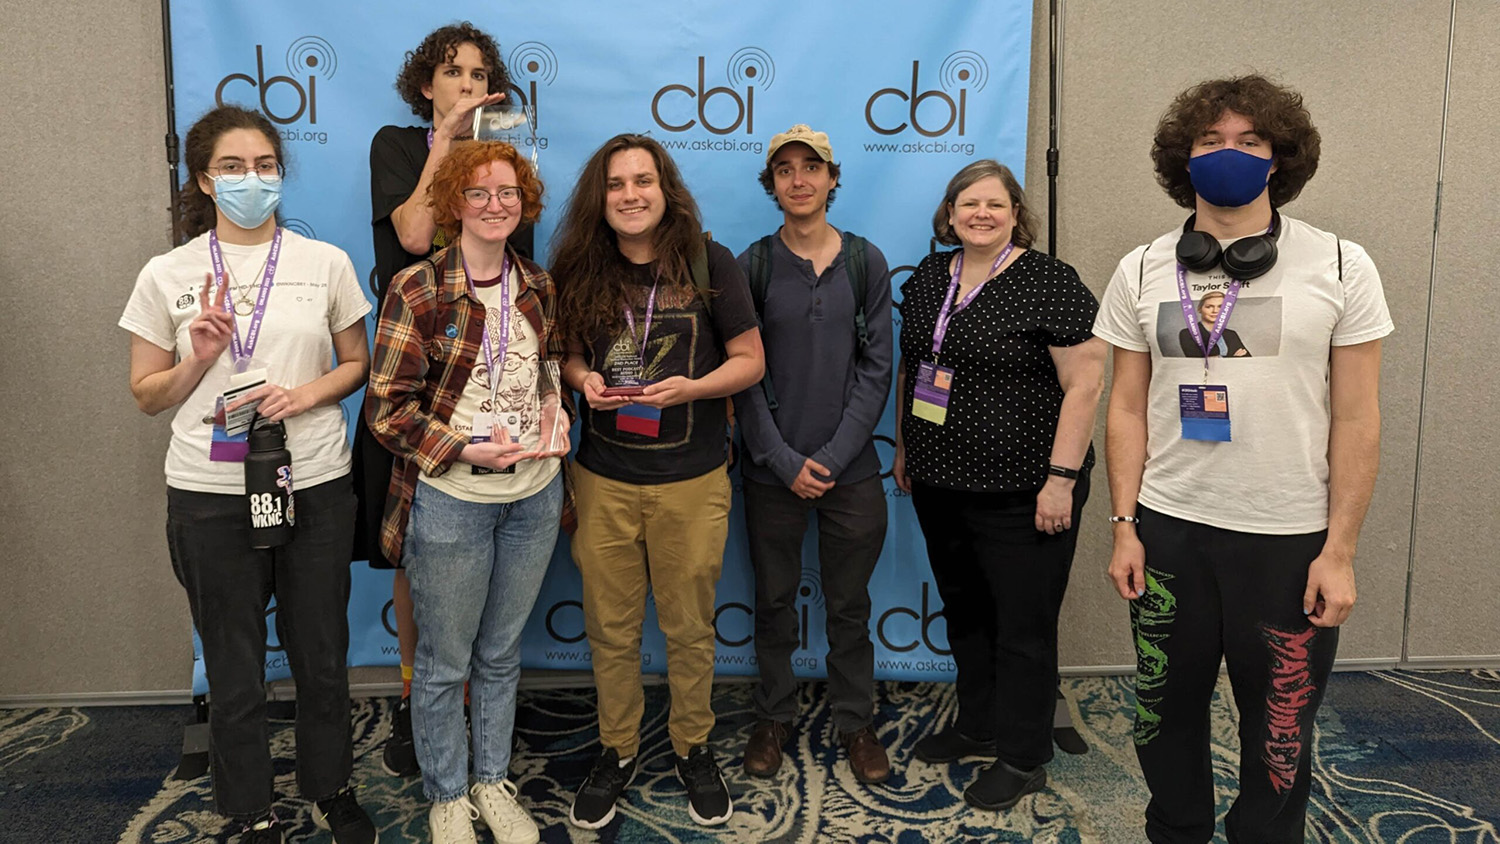 From left, Sophia Cunningham, Erie Mitchell, Claire Conklin, Rose Kelley, Nick Pinto, Jamie Lynn Gilbert and Spencer Grattan accepted awards for Best Podcast, Best Video Promo and Best DJ at the College Broadcasters, Inc. National Student Production Awards on Oct. 21 in Orlando.